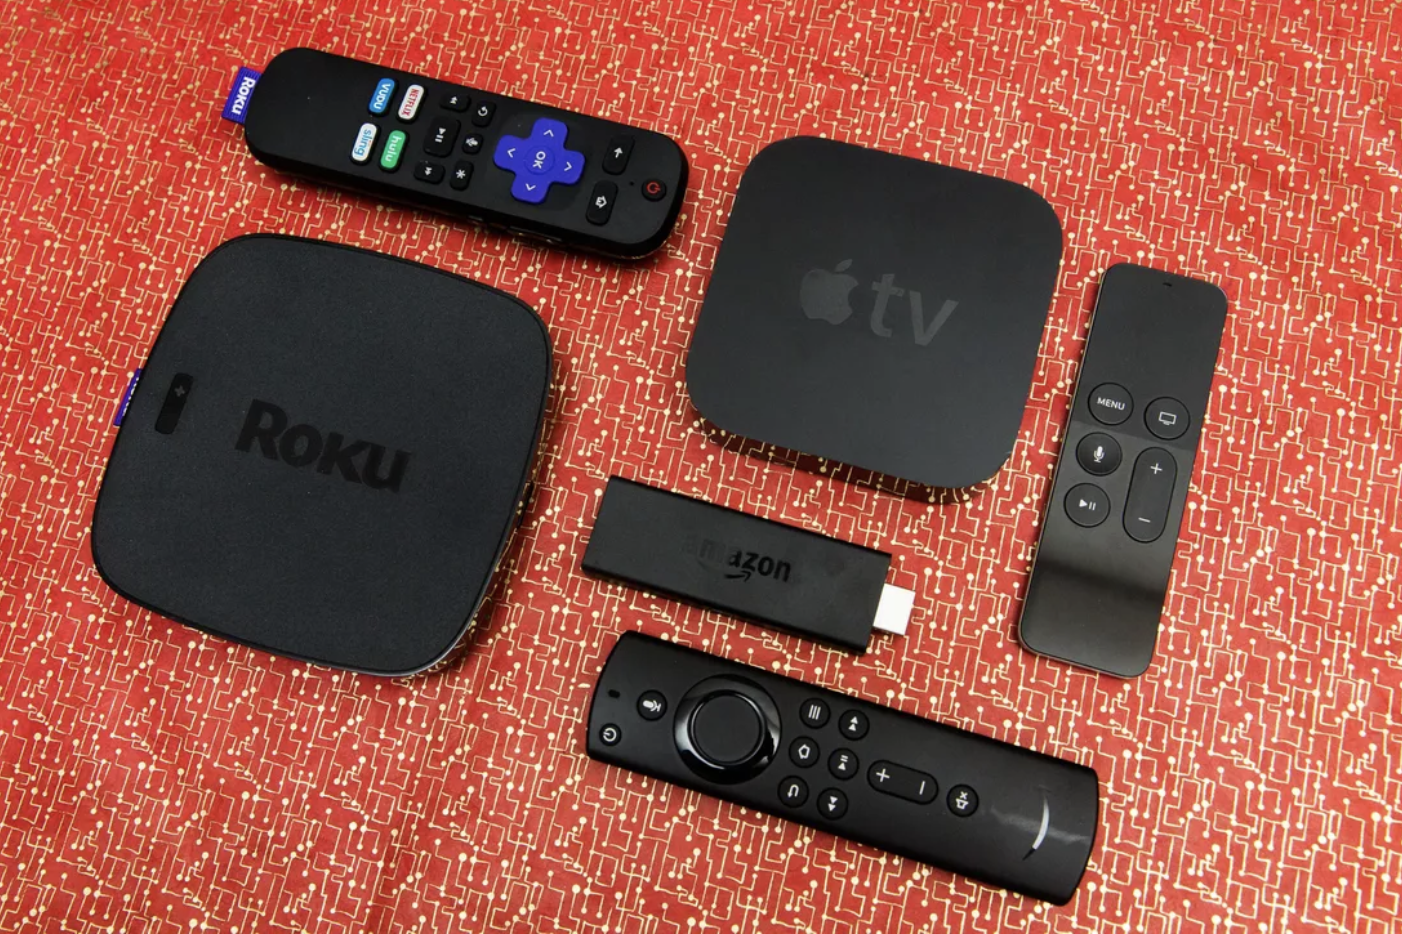 Best streamer in 2021: Roku, Apple TV 4K, Fire Stick, Chromecast with Google TV and more compared